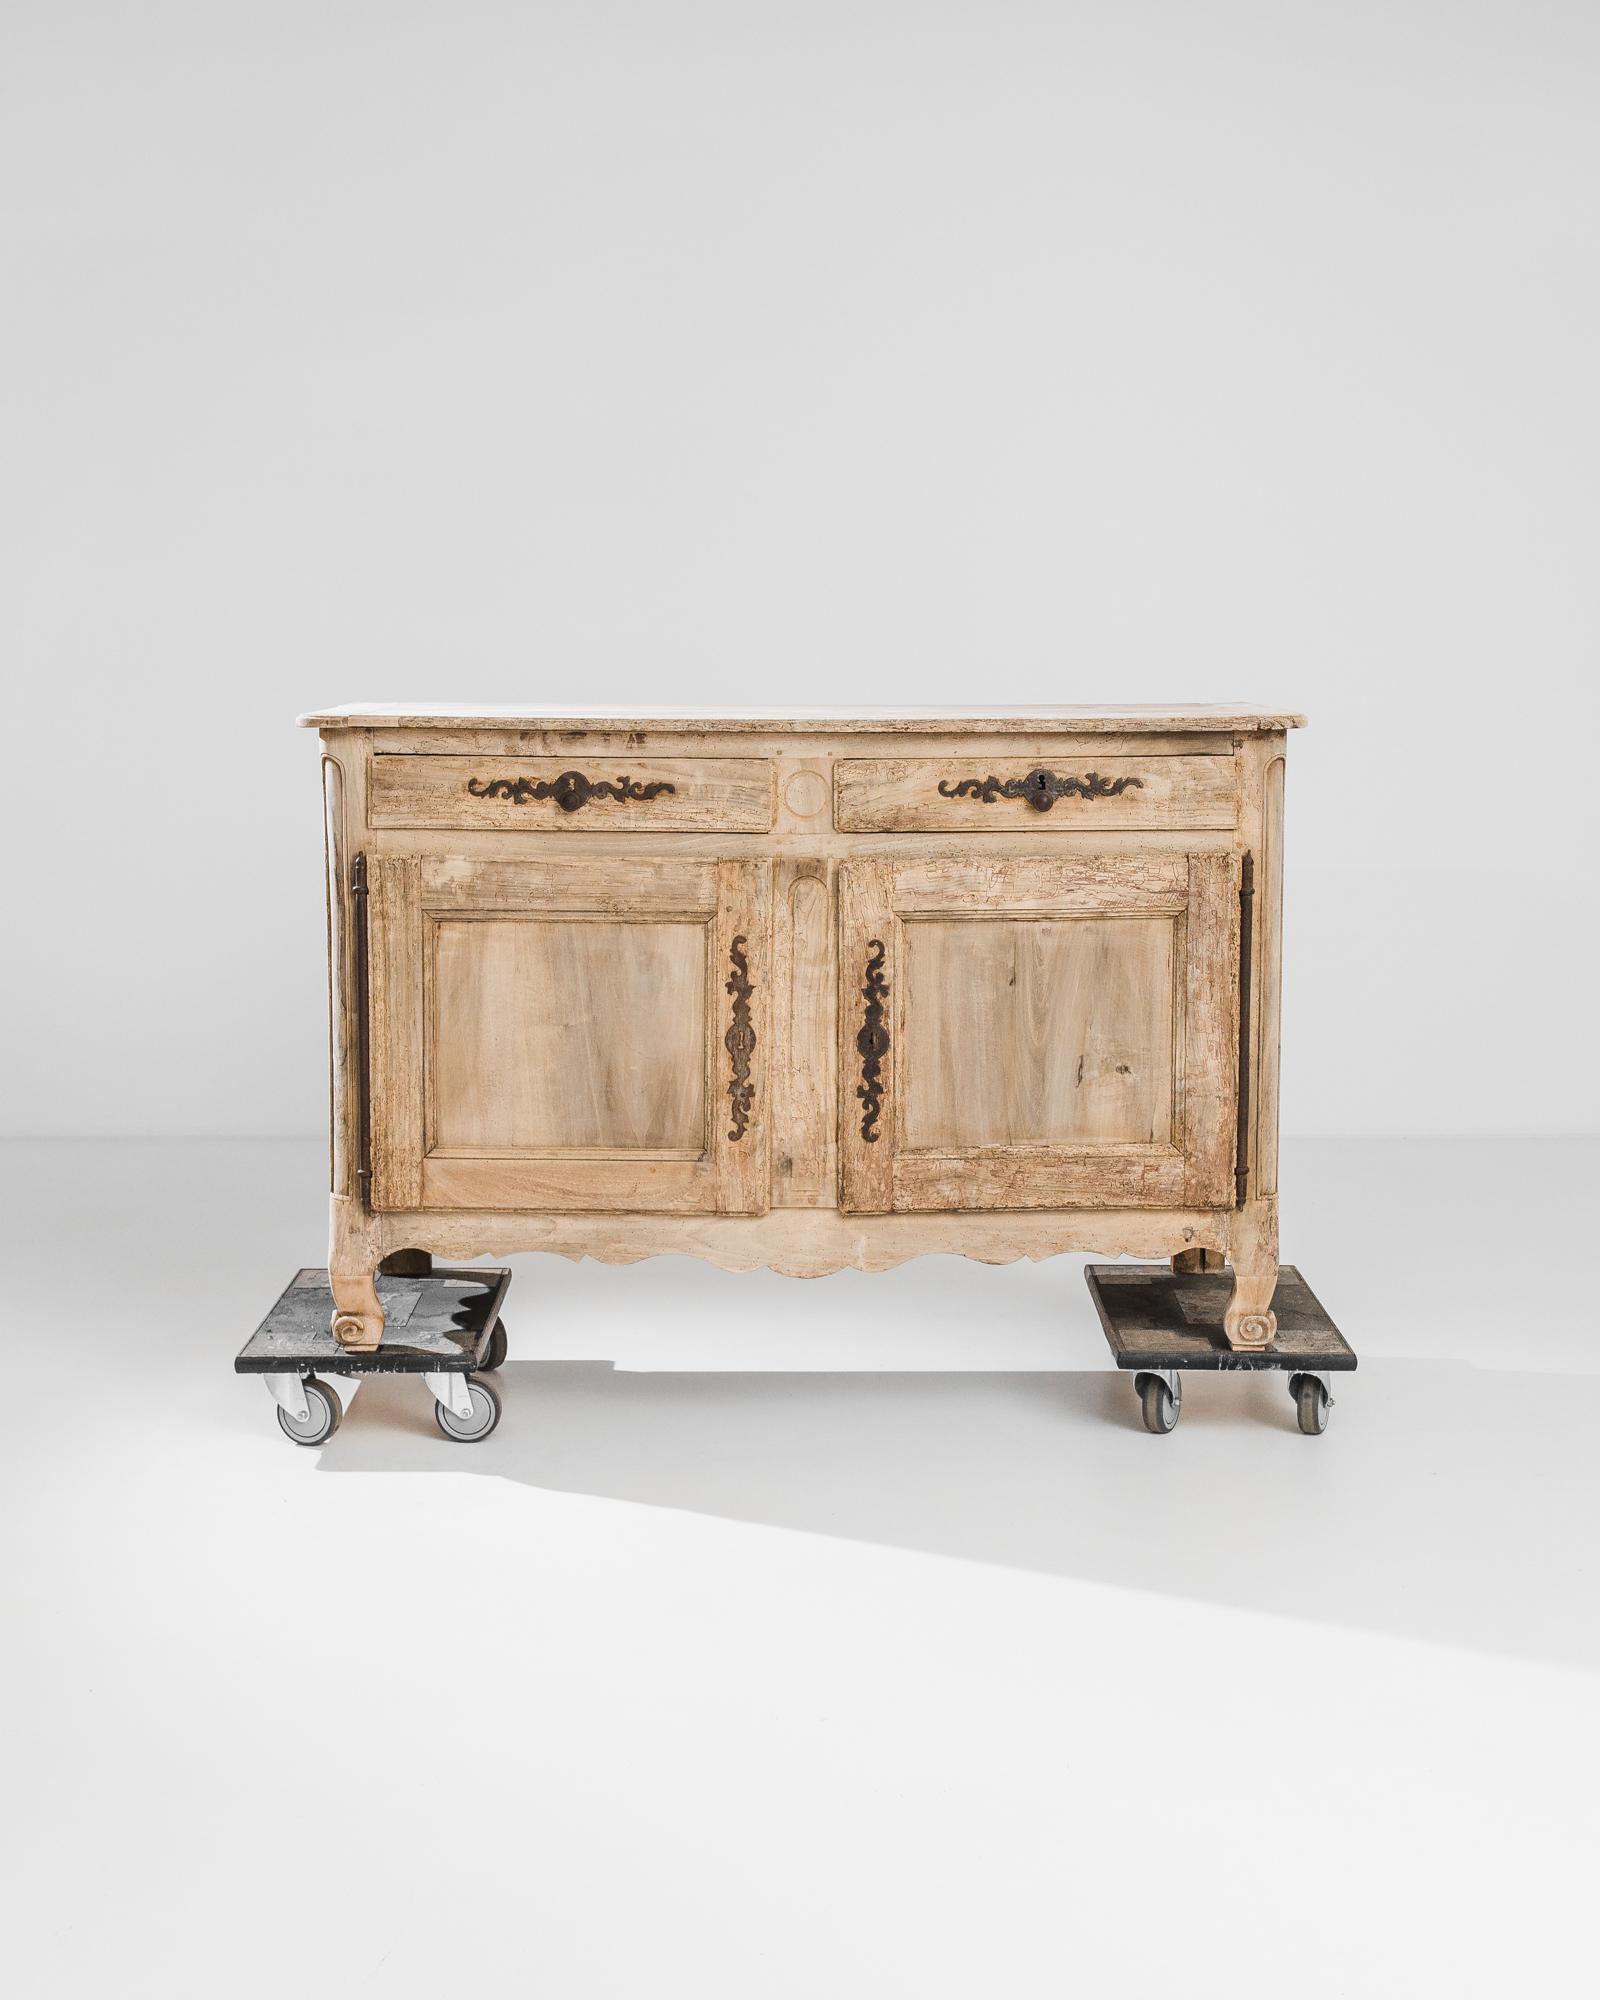 Romantic lock pieces and carved detail give this French country buffet an enchanting character. Made circa 1800, the upright shape of the case is enlivened by scrolled feet and a scalloped apron. An oxidized patina dapples the elaborate tendrils of